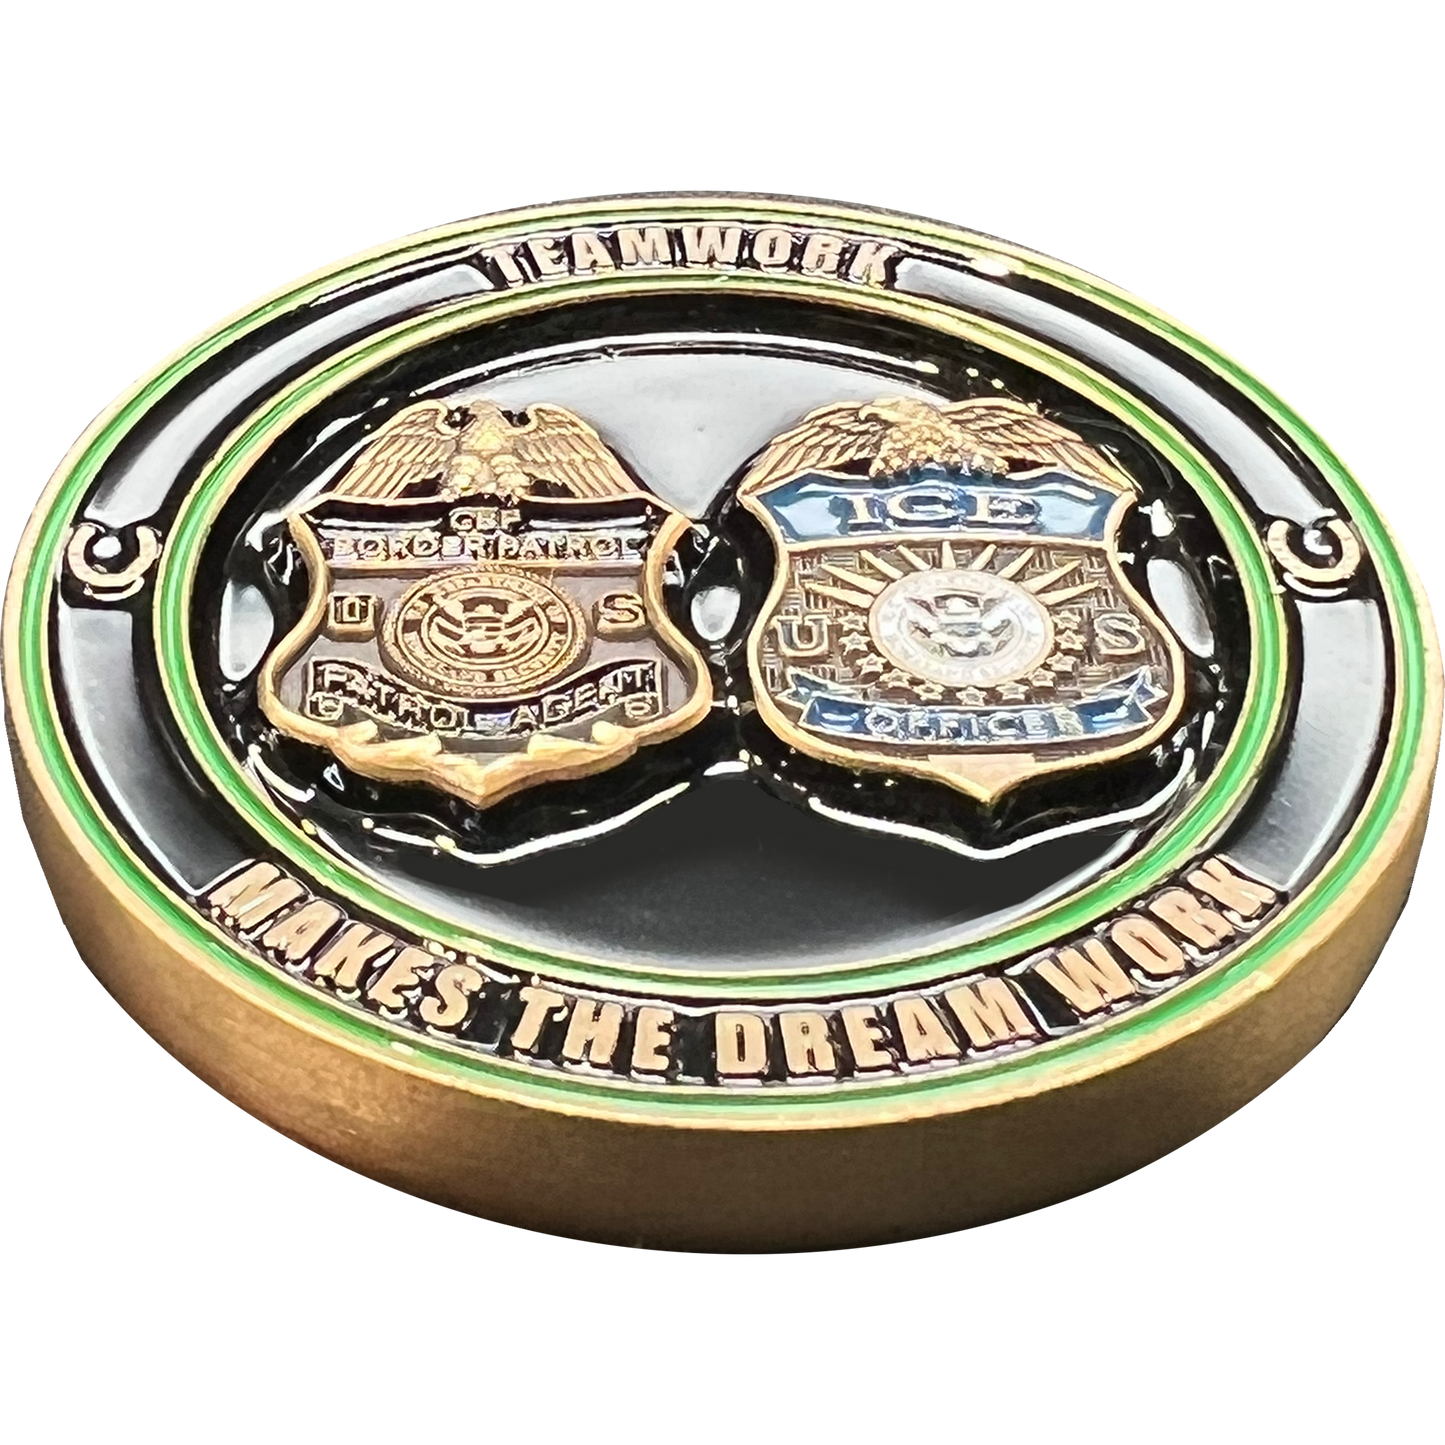 DL13-003 ICE and Border Patrol Border Crisis Joint Operations Challenge Coin 2021 2022